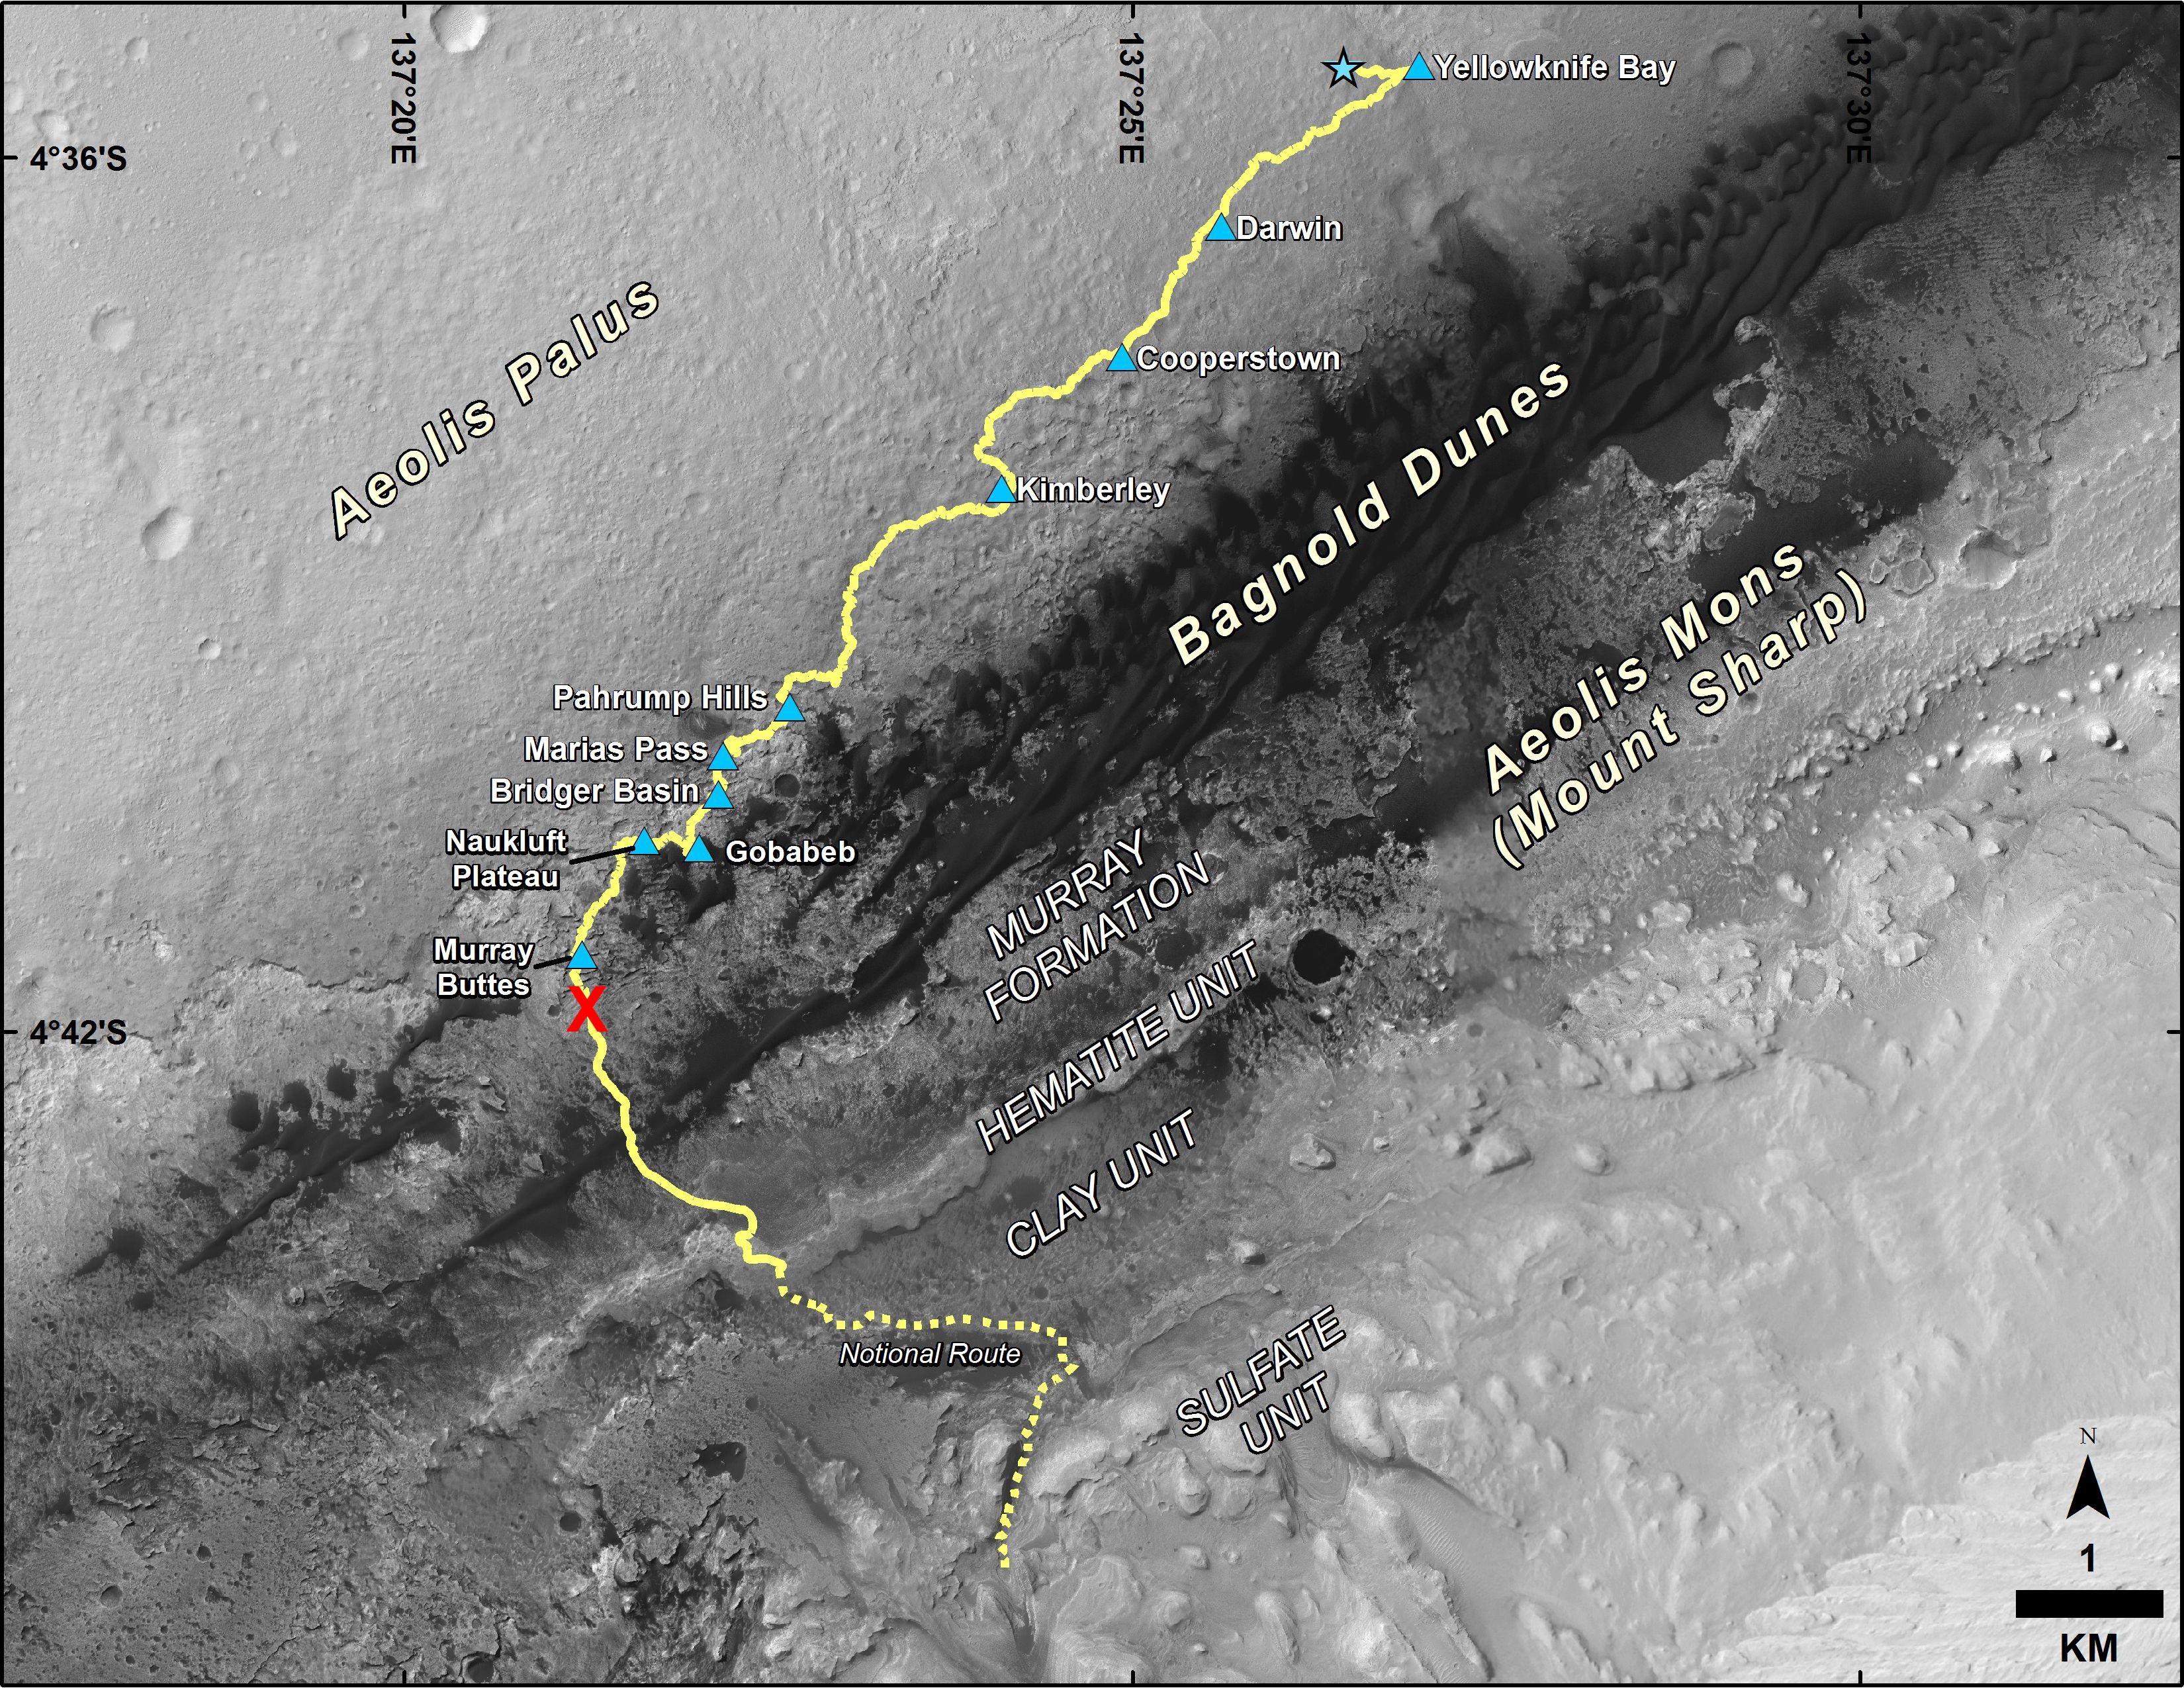 msl-curiosity-mount-sharp-route-traverse-pia20846-full-rens